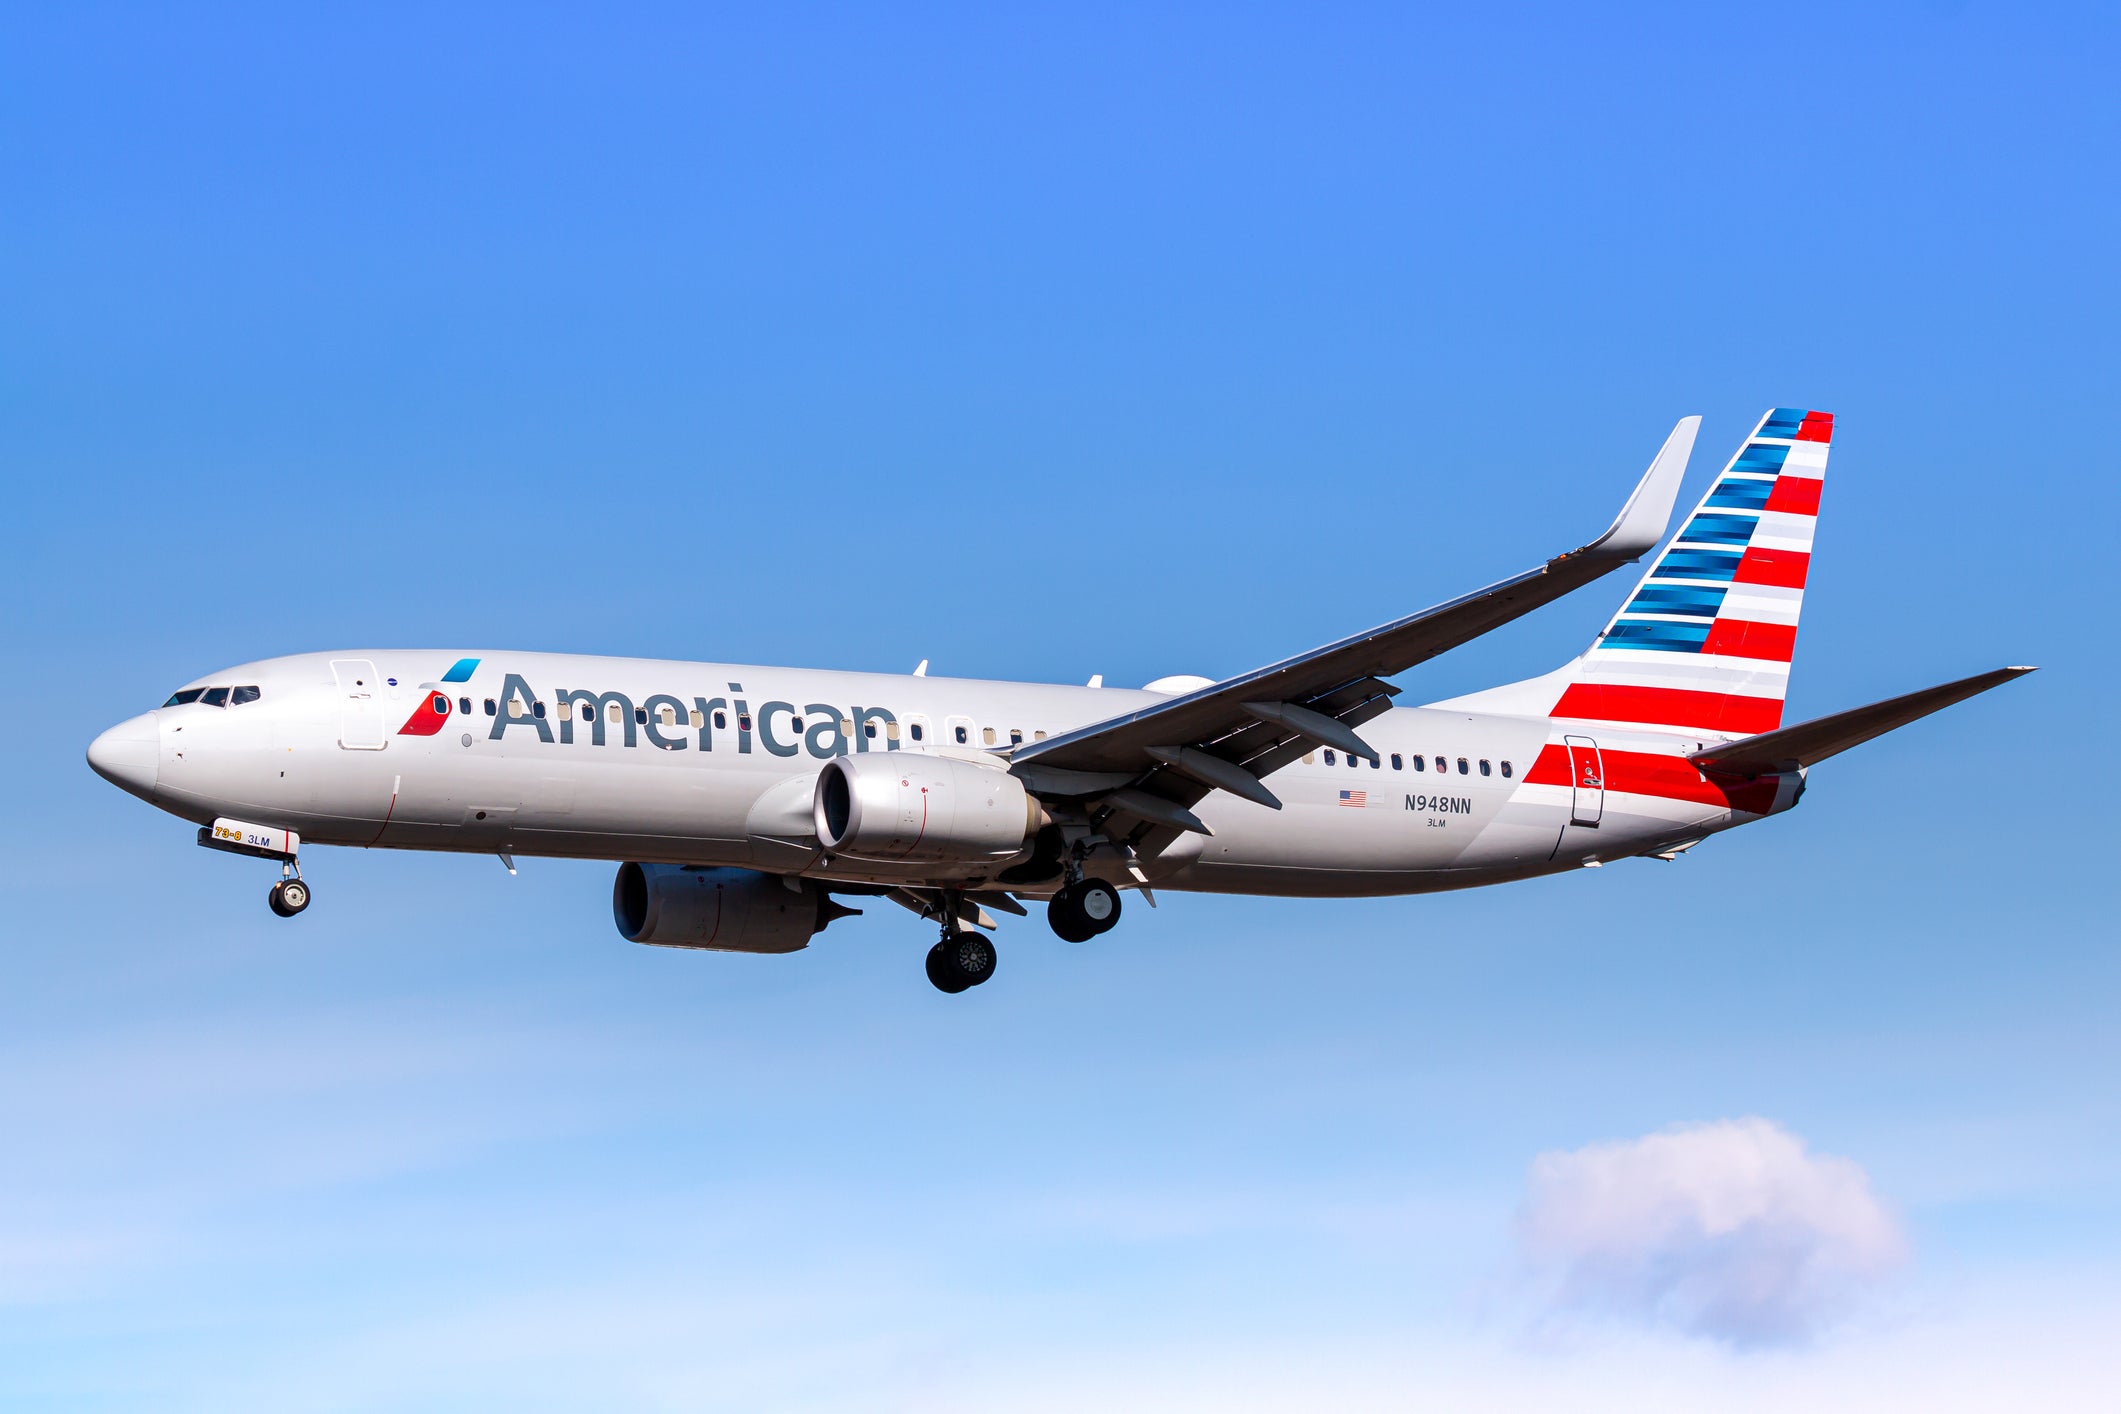 American Airlines has suspended alcohol service after a violent incident left a Southwest Airlines flight attendant missing two teeth